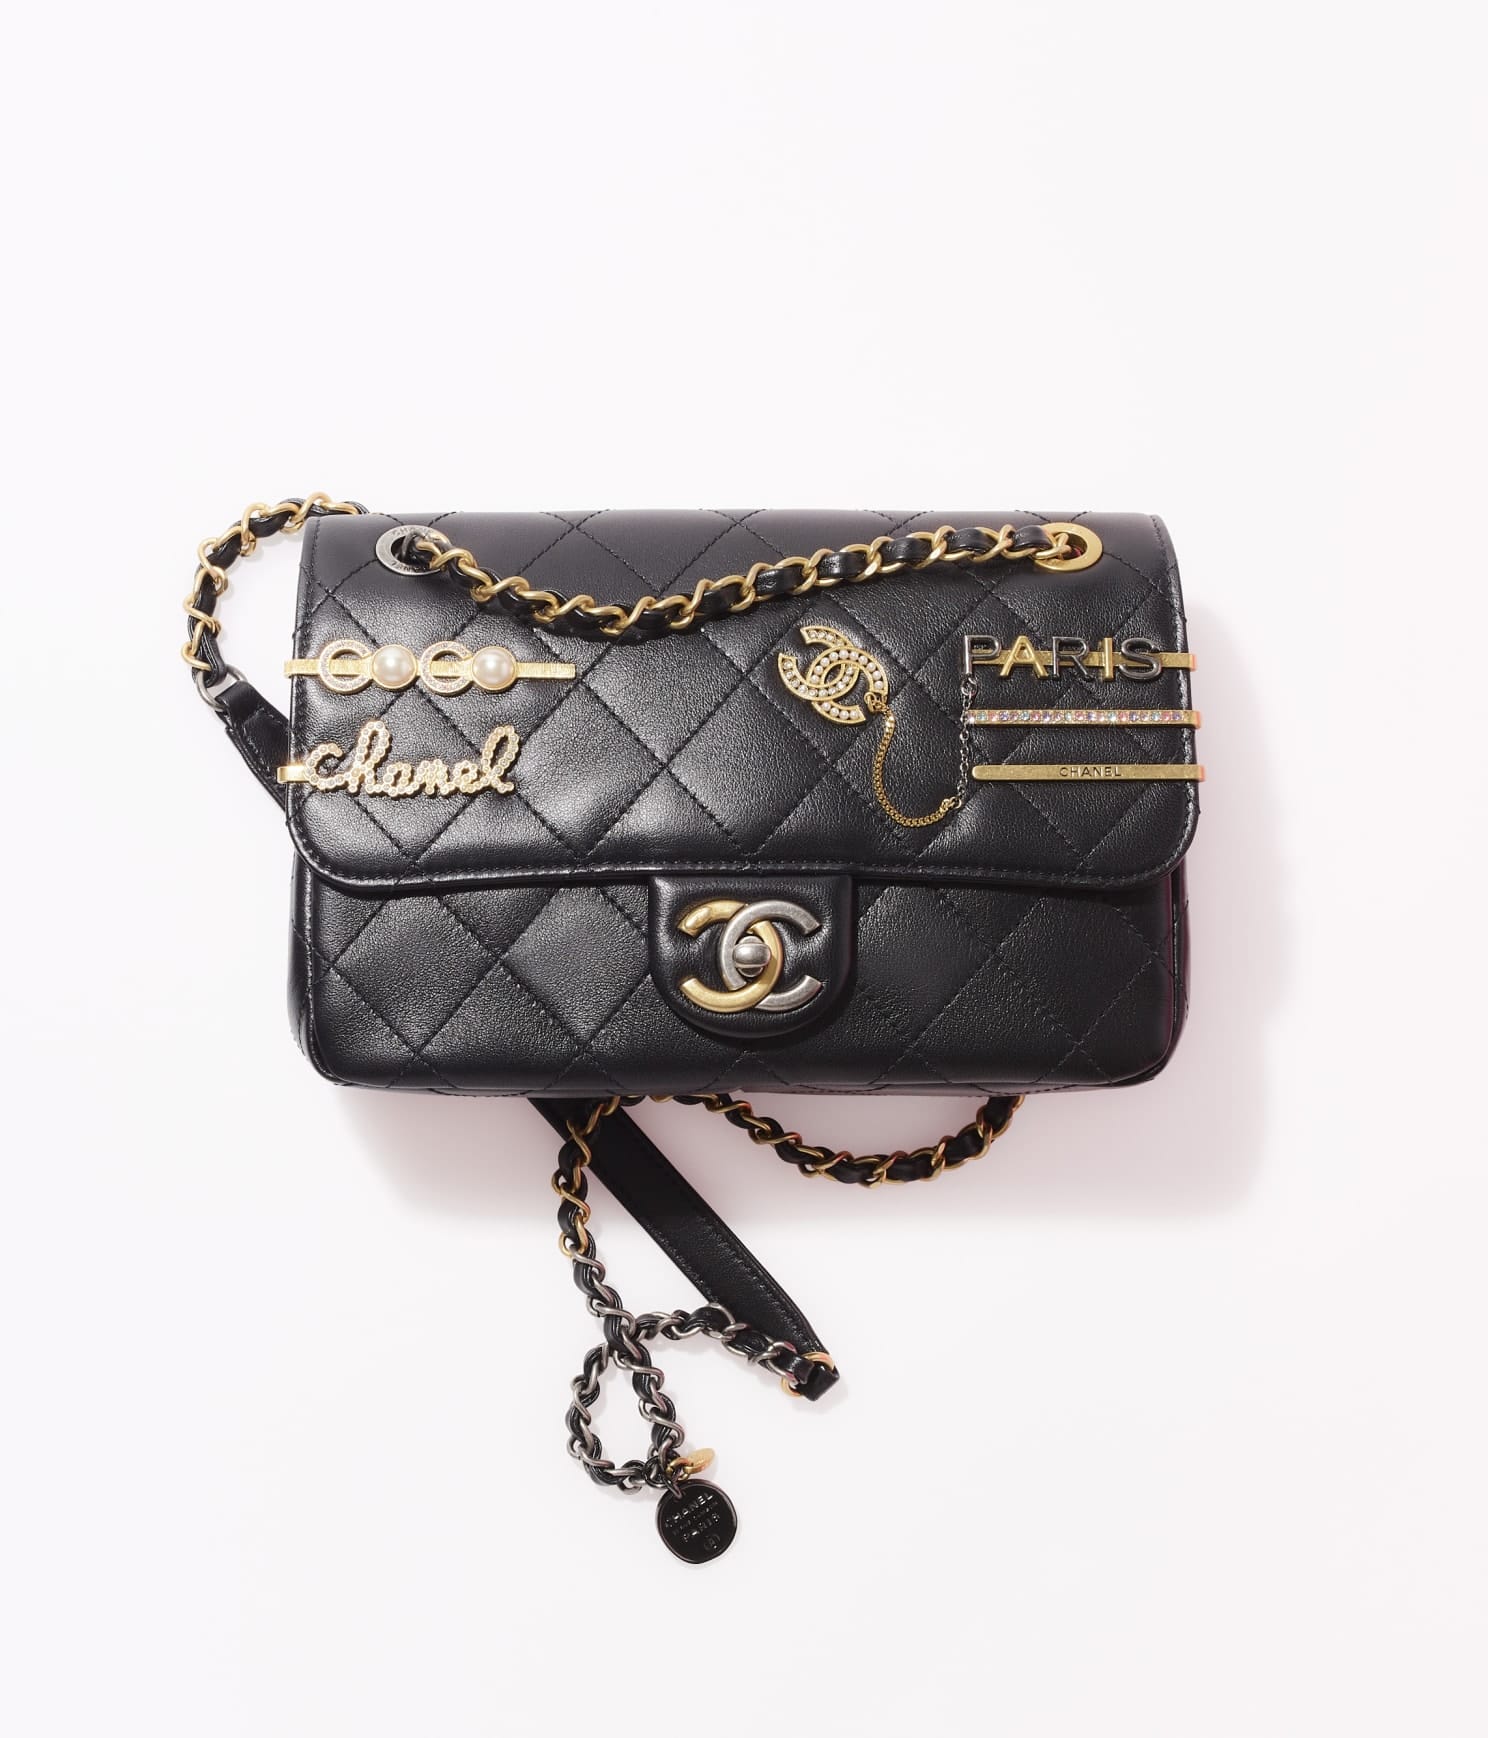 Chanel Bag Prices How Much for a Chanel Bag  FifthAvenueGirlcom